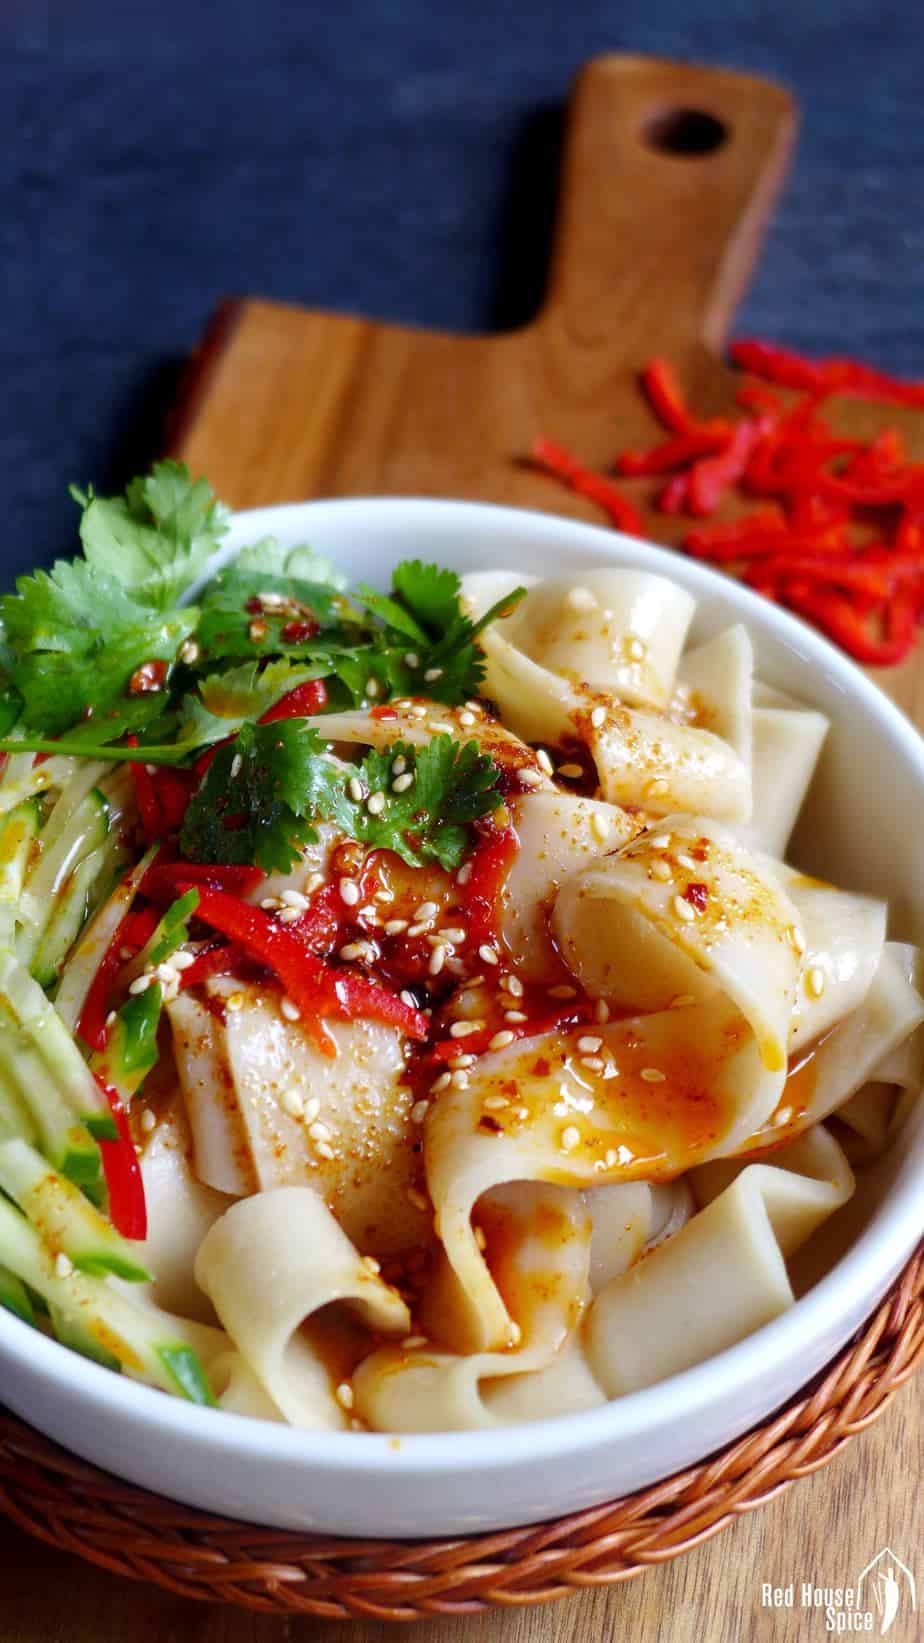 A bowl of Liang Pi (cold skin noodles) seasoned with chilli oil and sesame seeds.